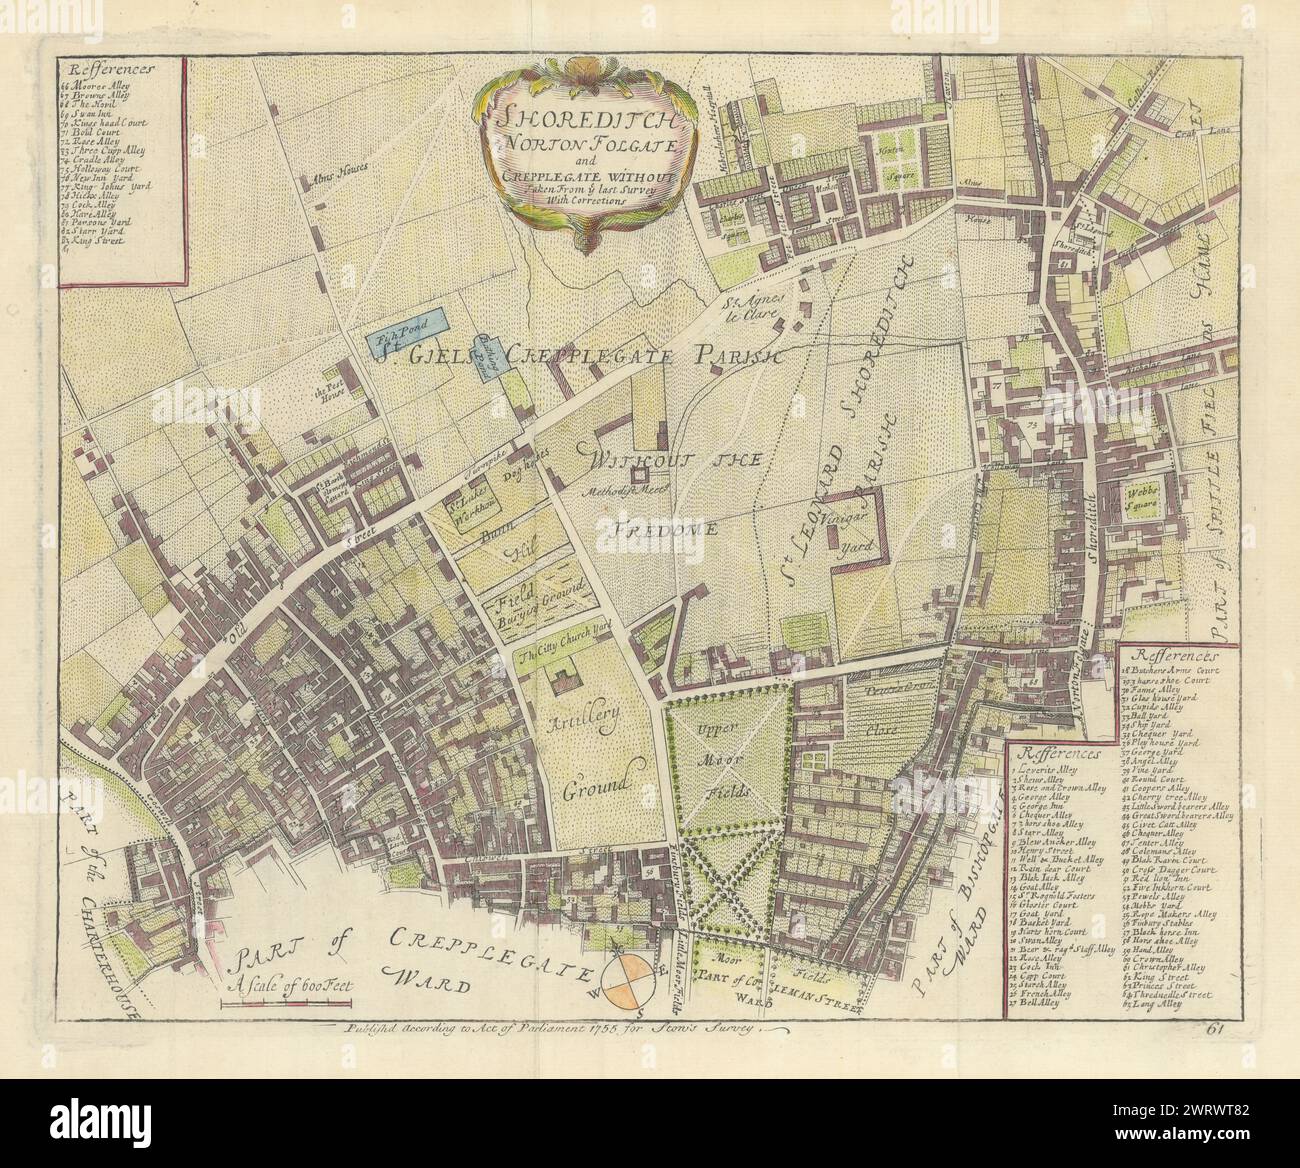 Shoreditch, Norton Folgate & Cripplegate Without. Hoxton. STOW/STRYPE 1755 map Stock Photo